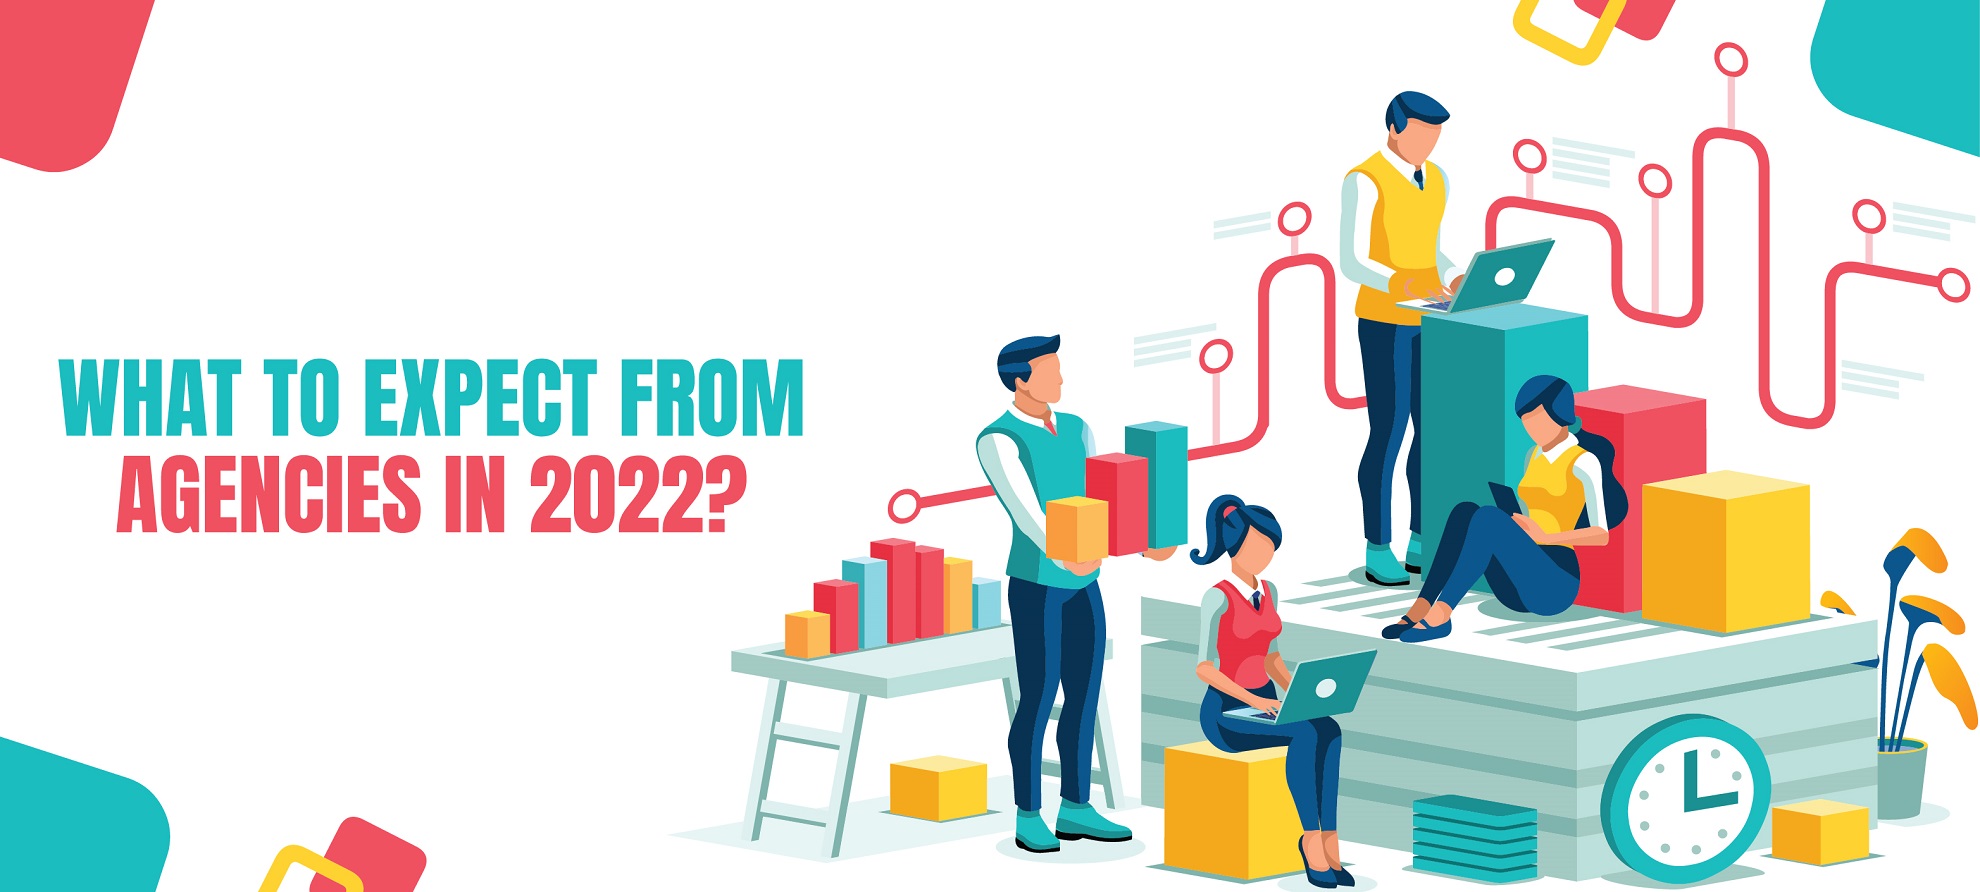 What to Expect from Agencies in 2022?